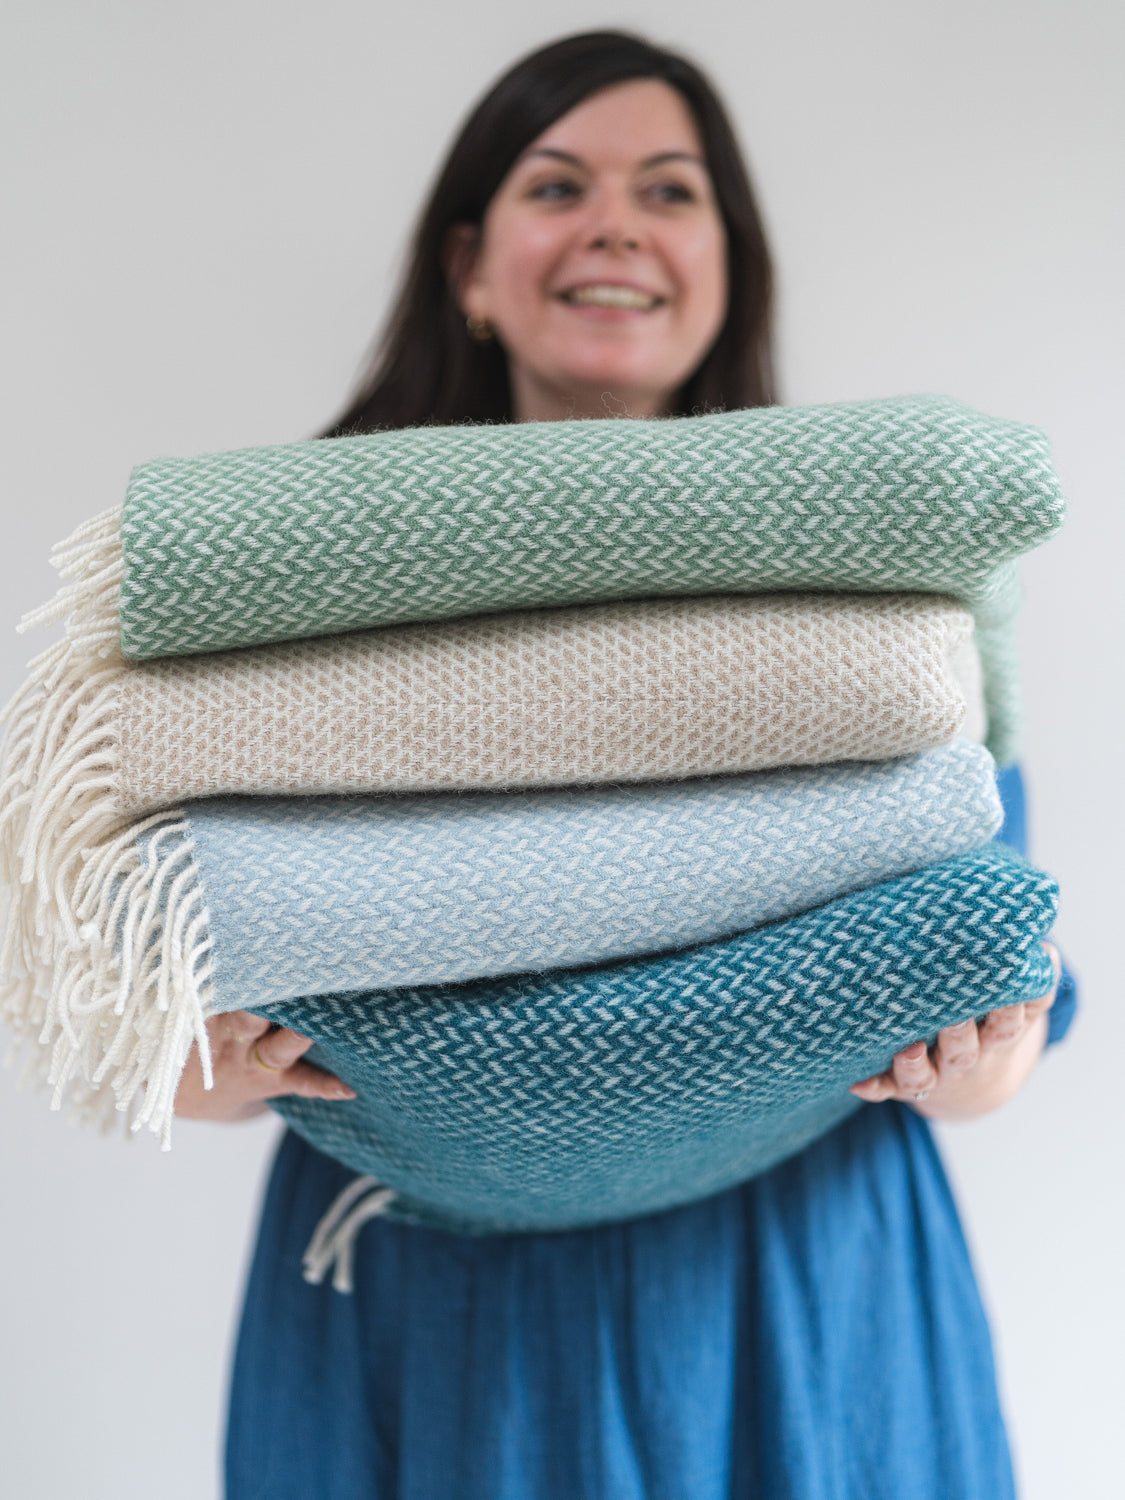 A woman holding out a stack of folded wool throws